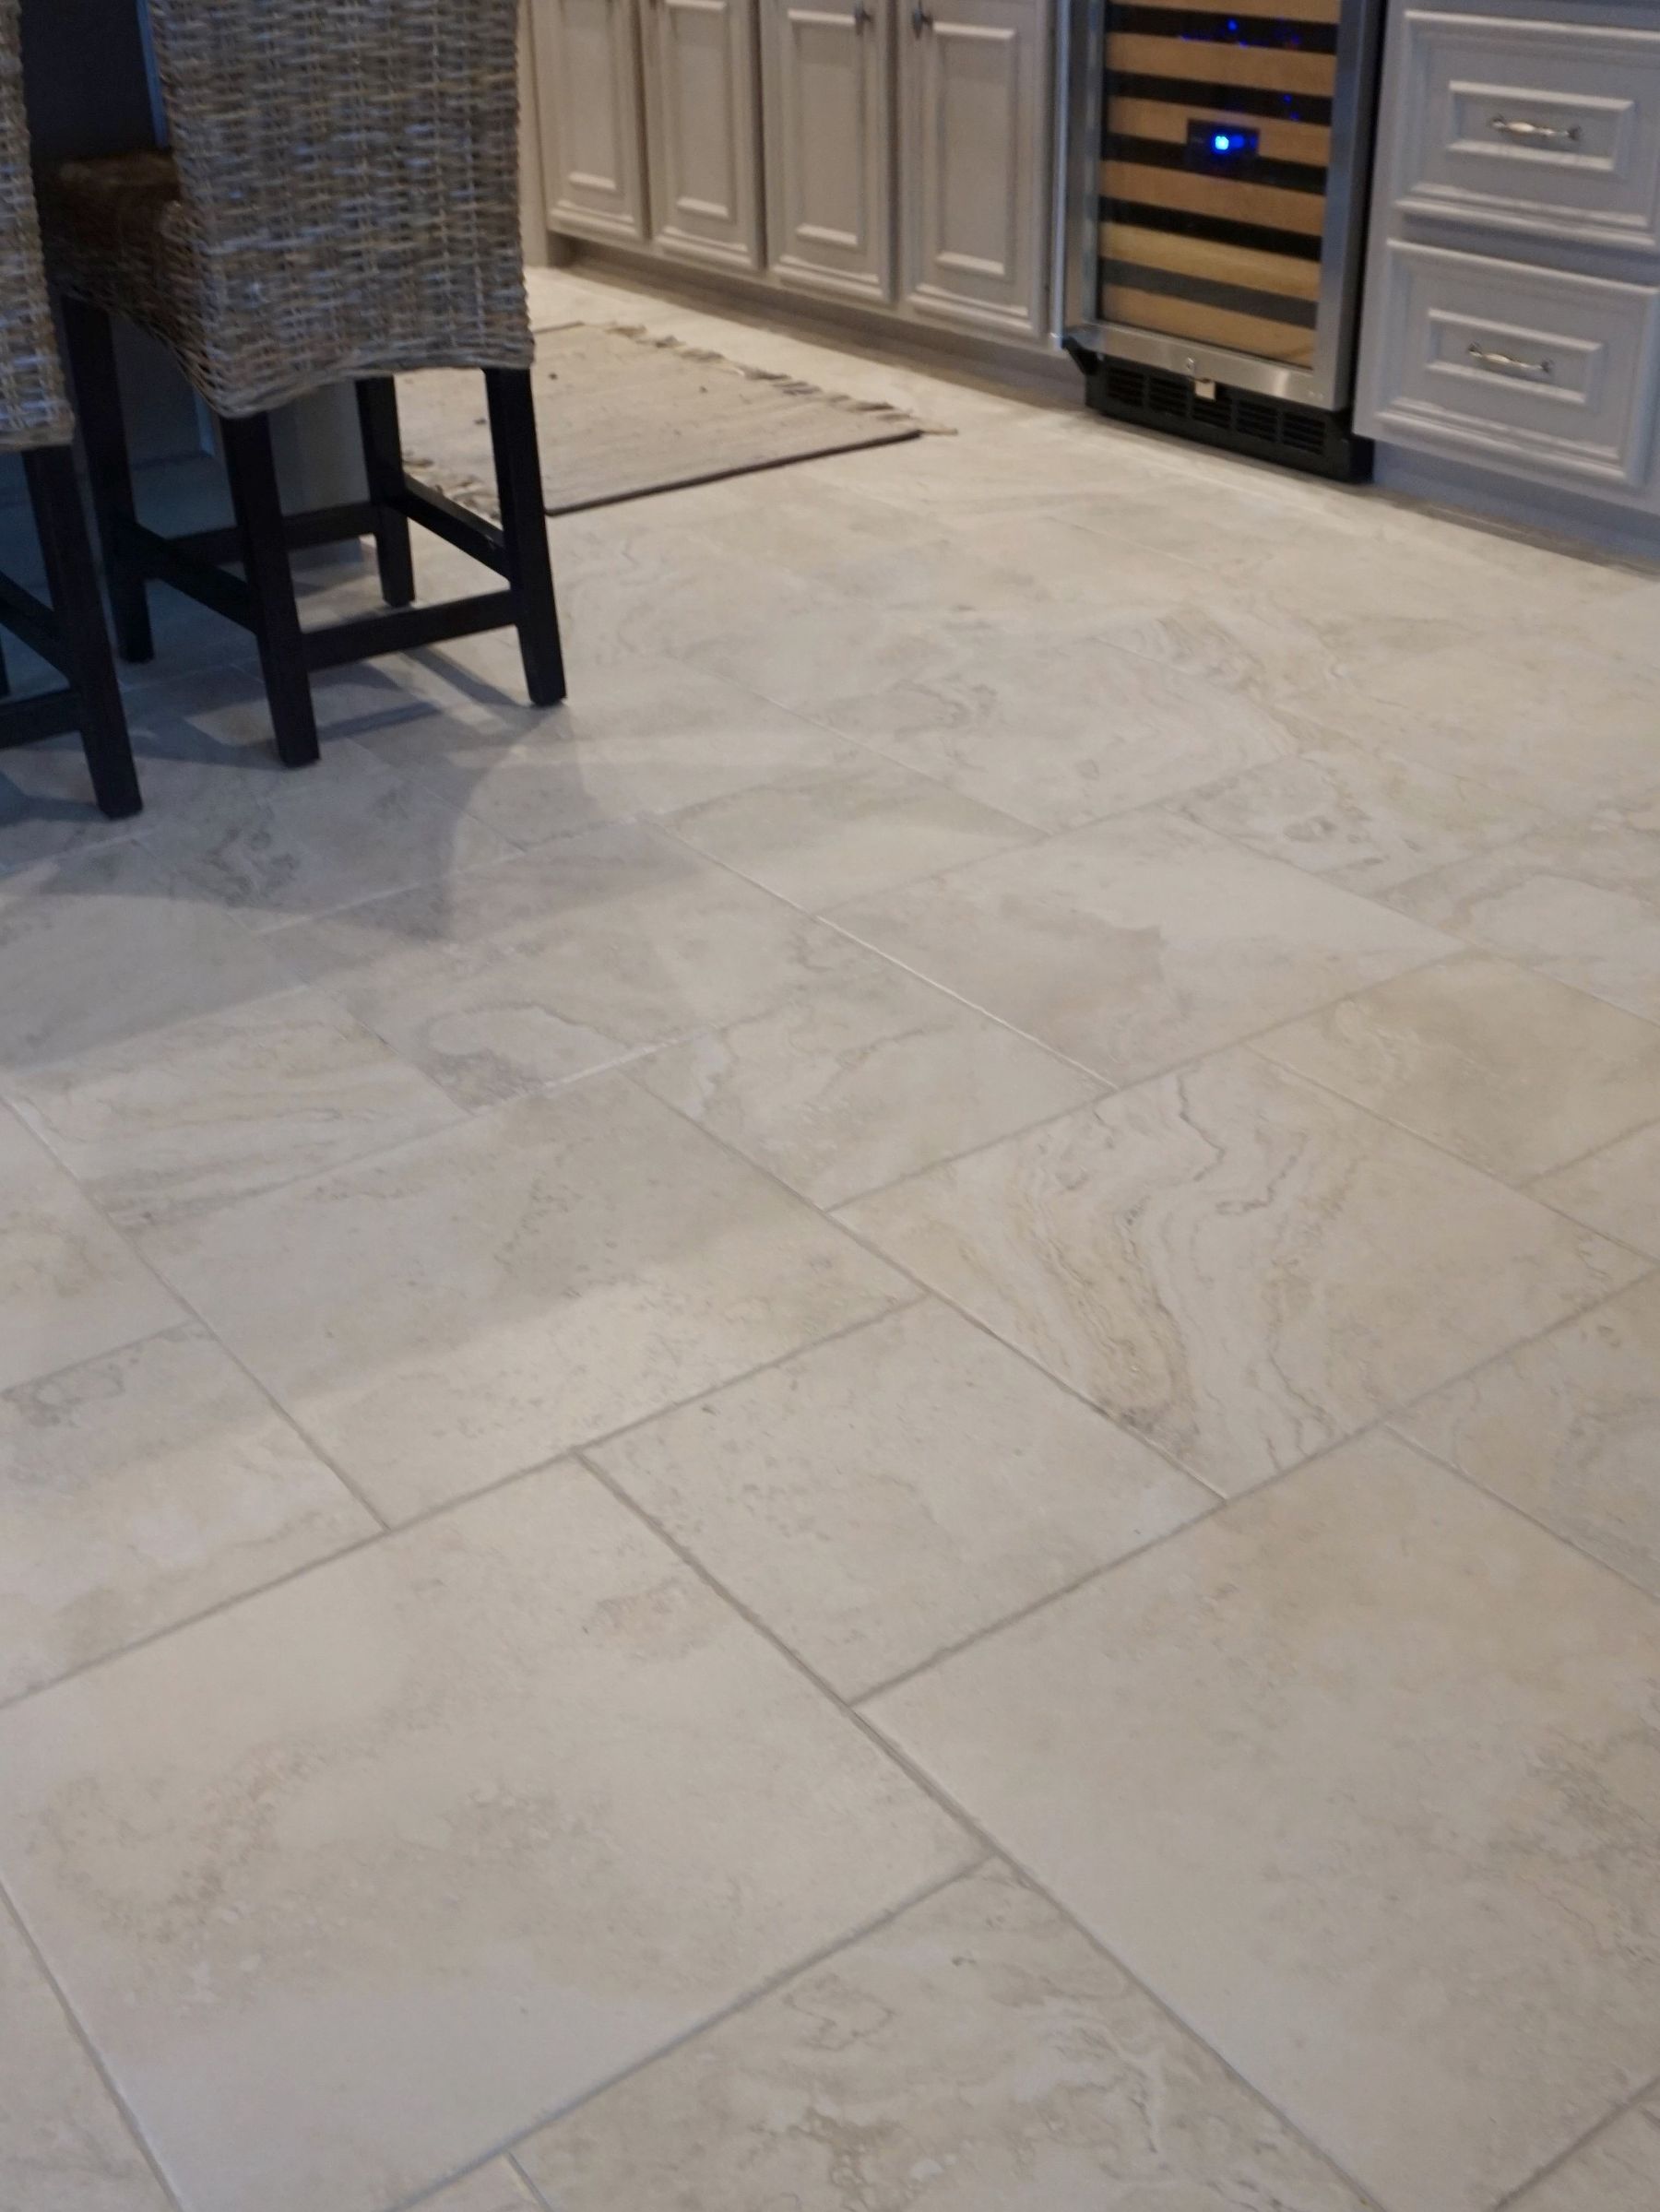 Light-colored tile flooring in different-sized tiles.